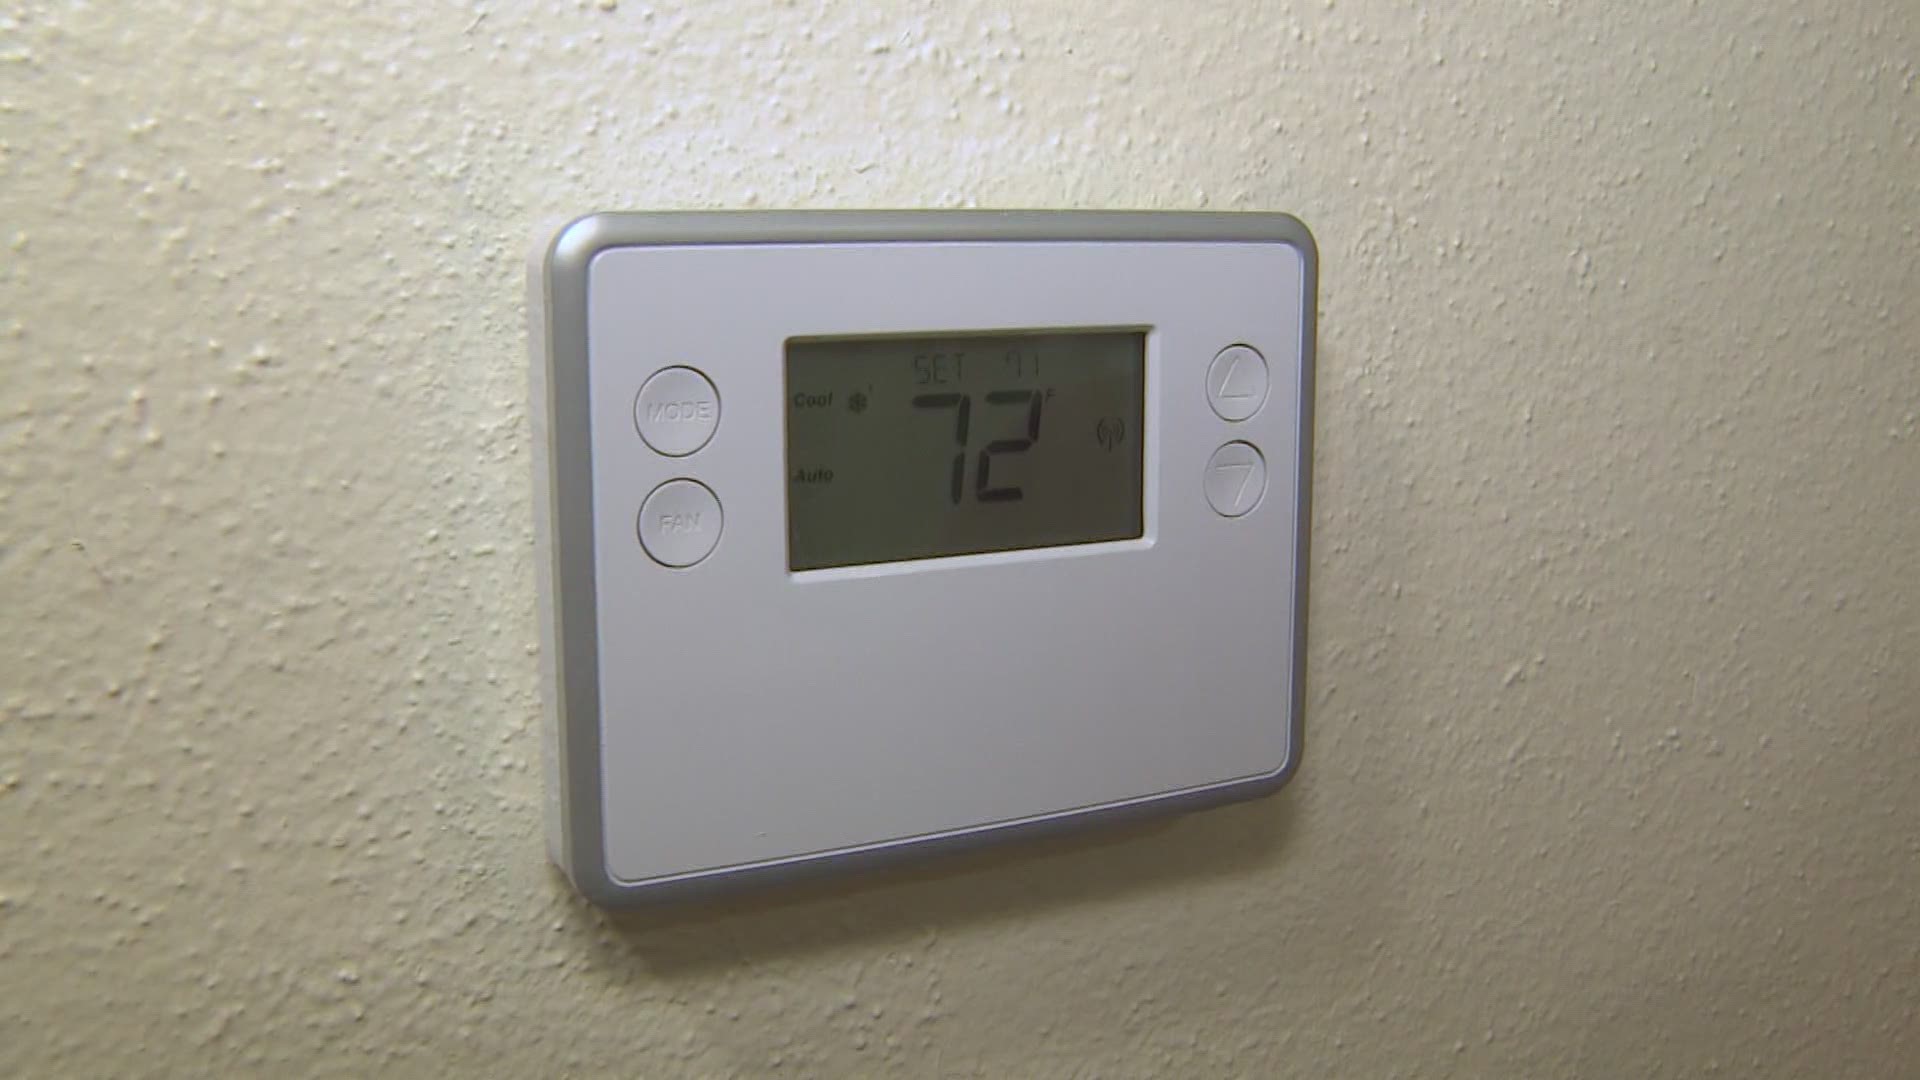 Some said they didn't know their thermostats were being accessed from afar until it was almost 80 degrees inside their homes.